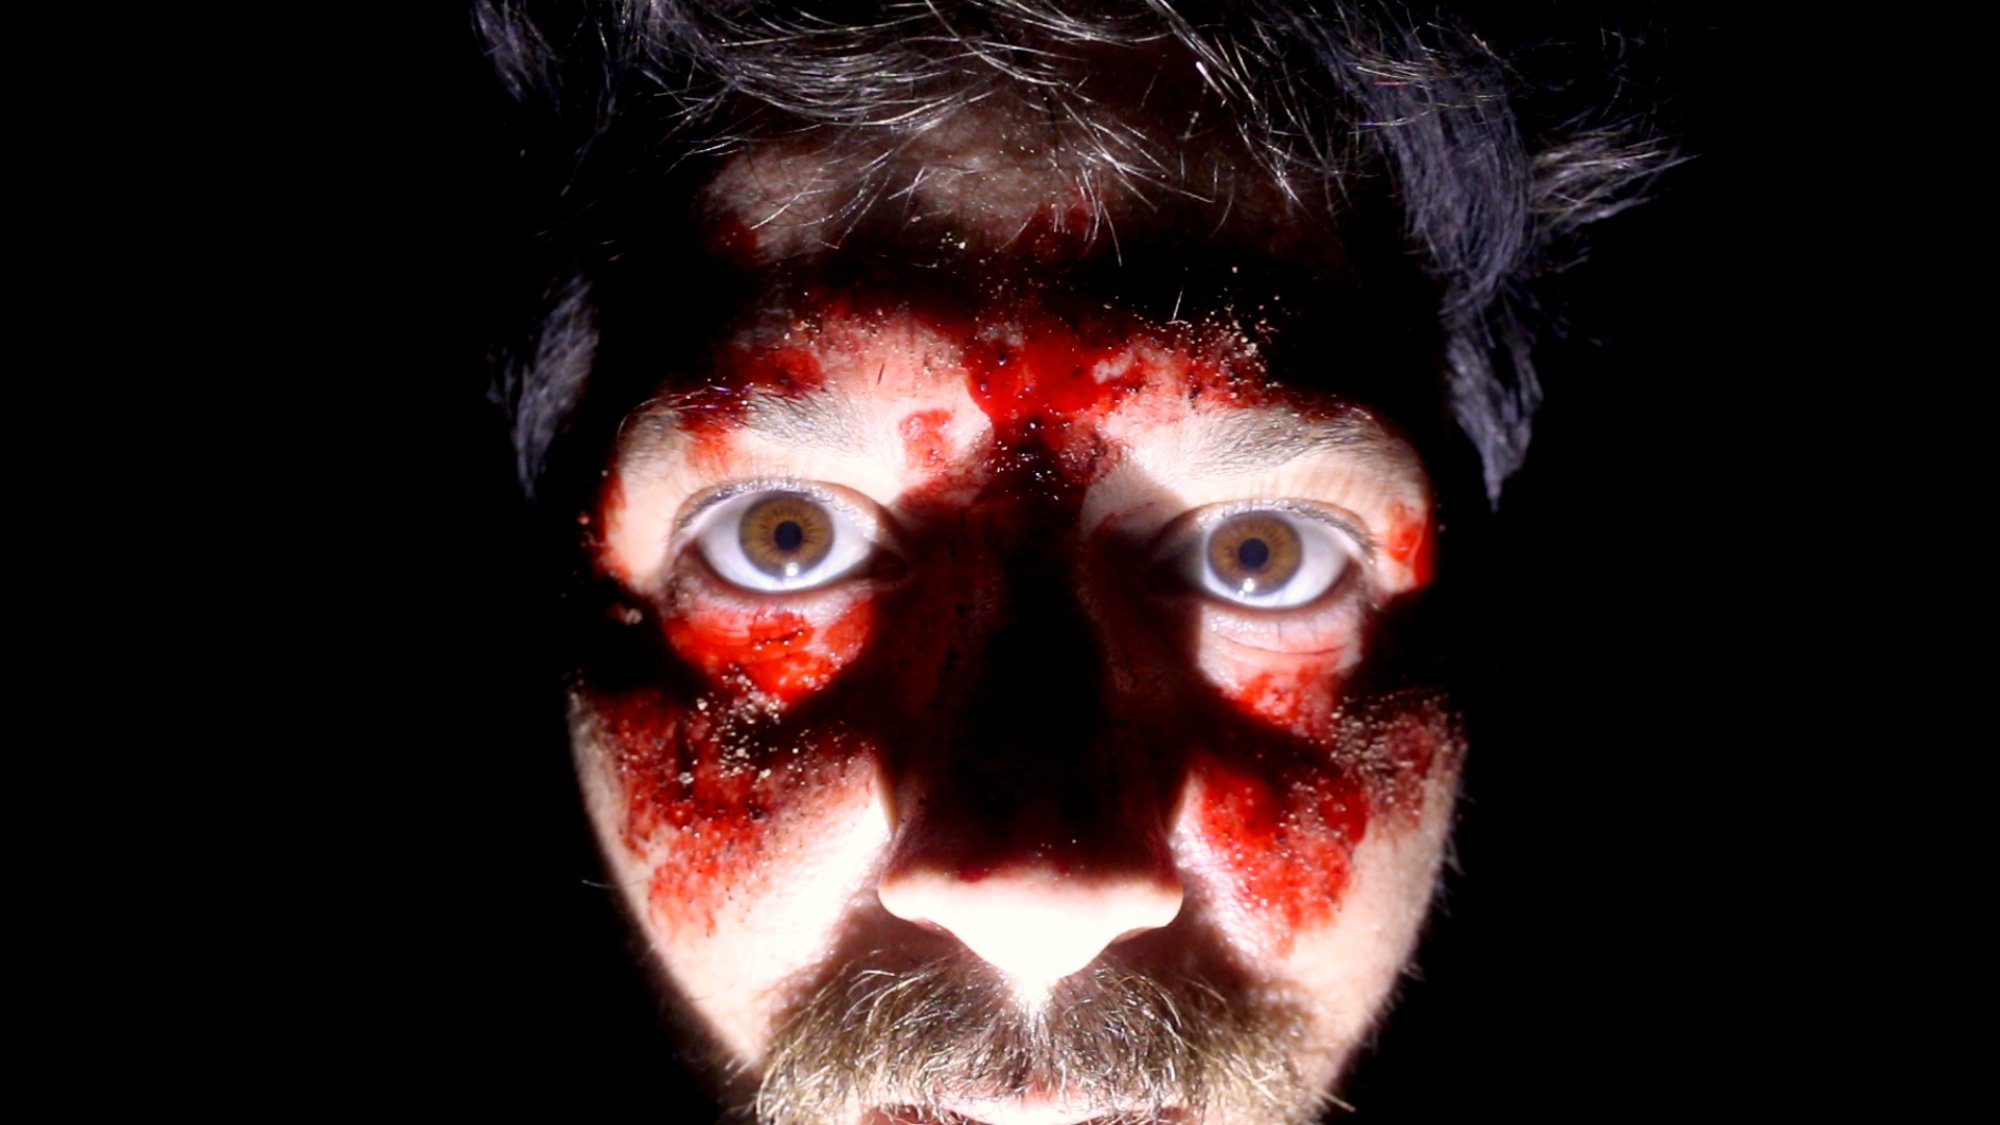 'The Outwaters' Robbie Banfitch as Robbie Zagorac looking into the camera surrounded by darkness with blood on his face